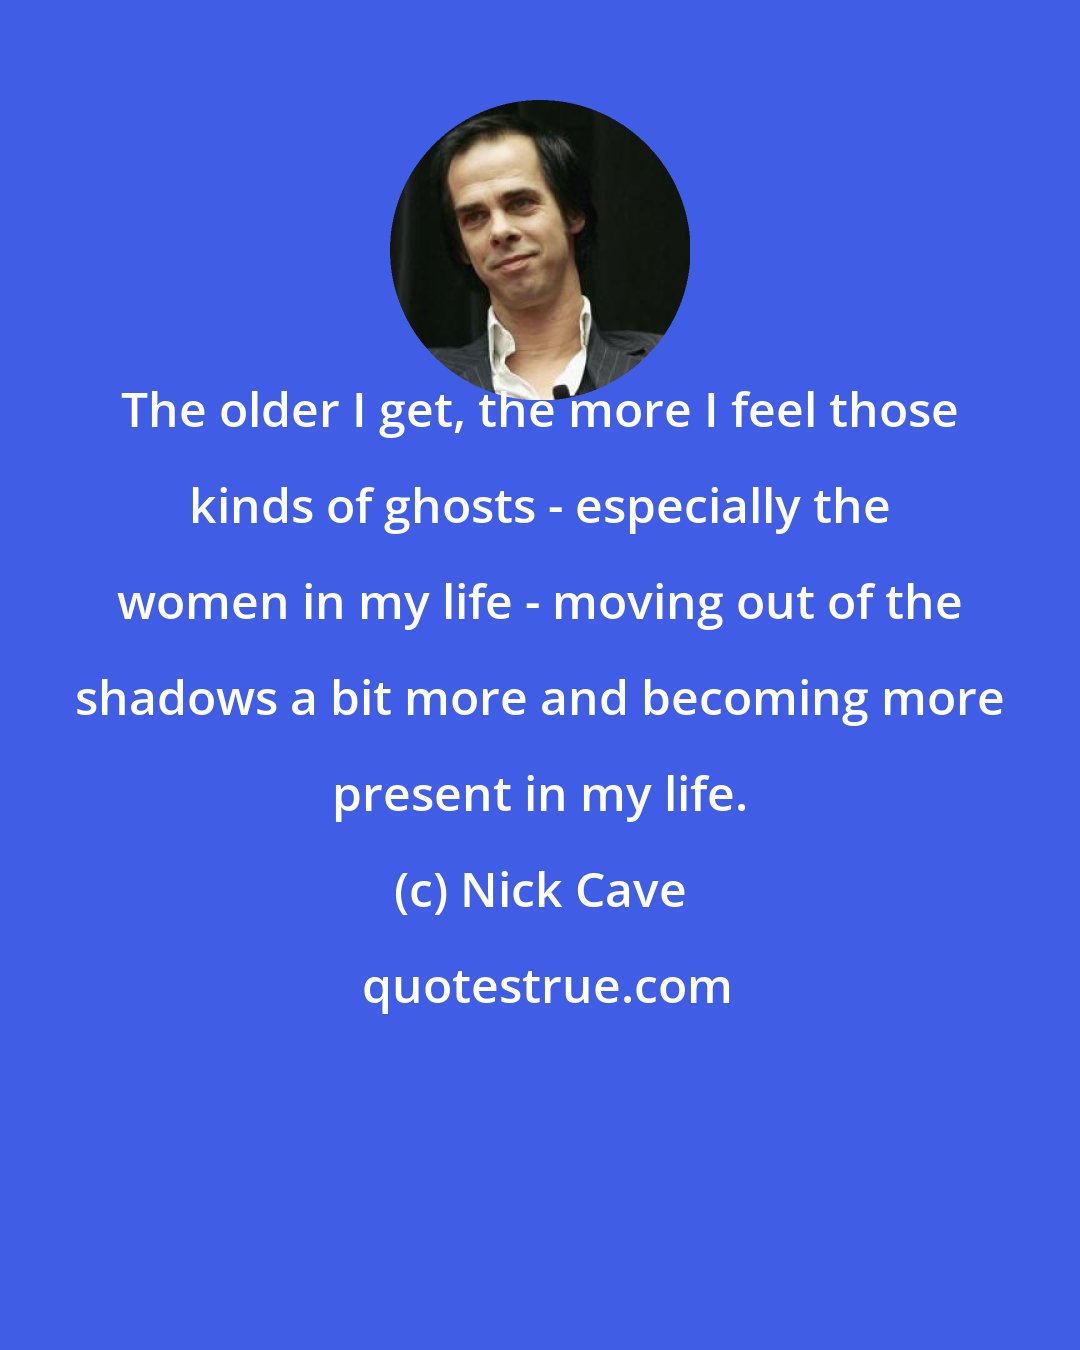 Nick Cave: The older I get, the more I feel those kinds of ghosts - especially the women in my life - moving out of the shadows a bit more and becoming more present in my life.